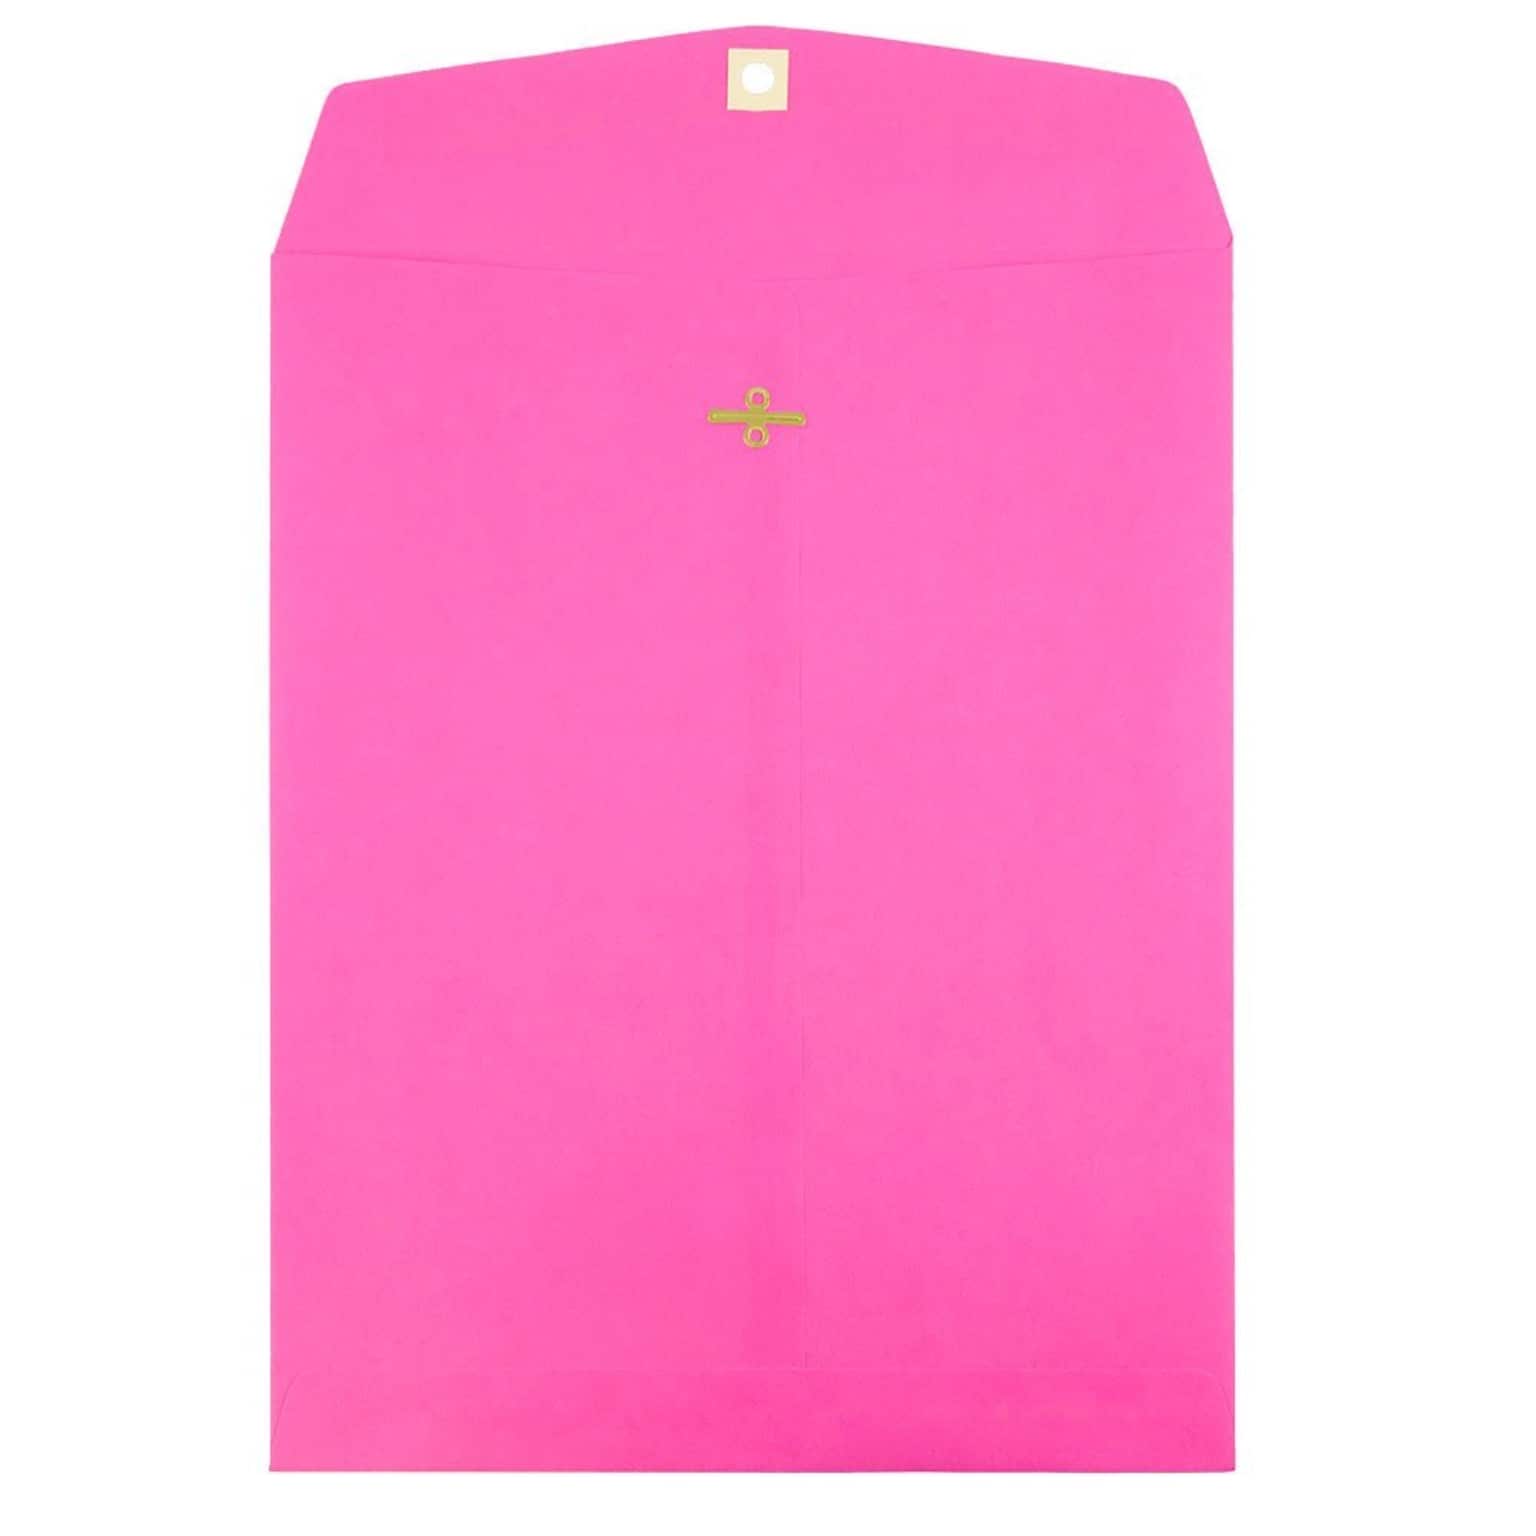 JAM Paper® 10 x 13 Open End Catalog Colored Envelopes with Clasp Closure, Ultra Fuchsia Pink, 50/Pack (900909026i)